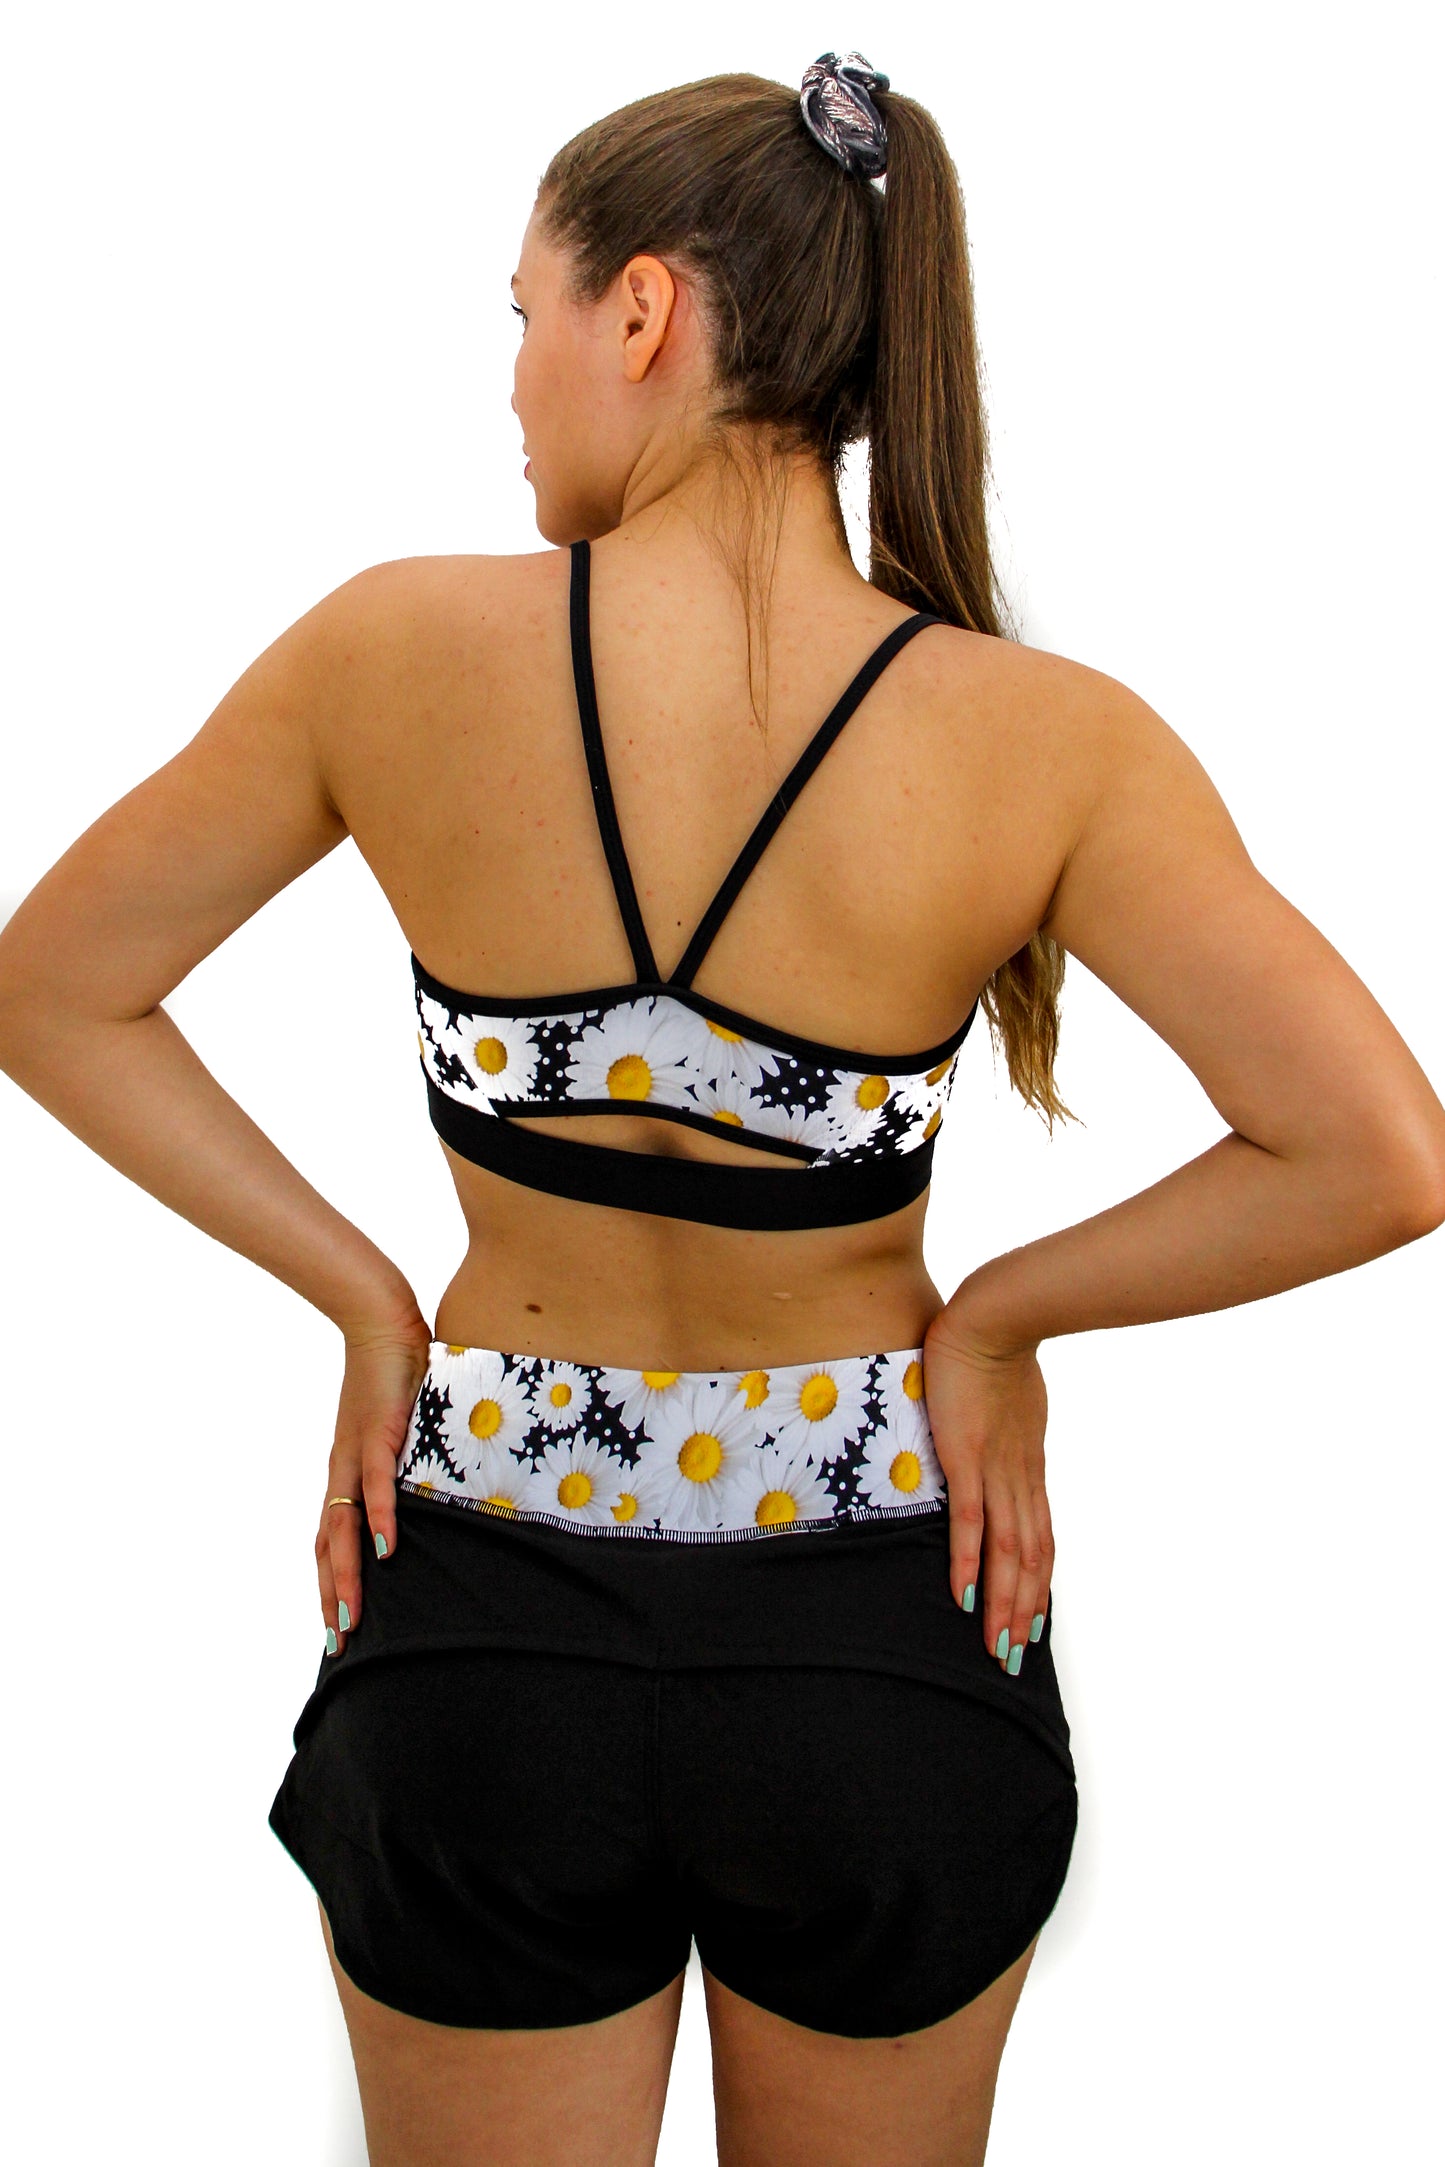 Daisy Sports Bra Classic style - holds very well